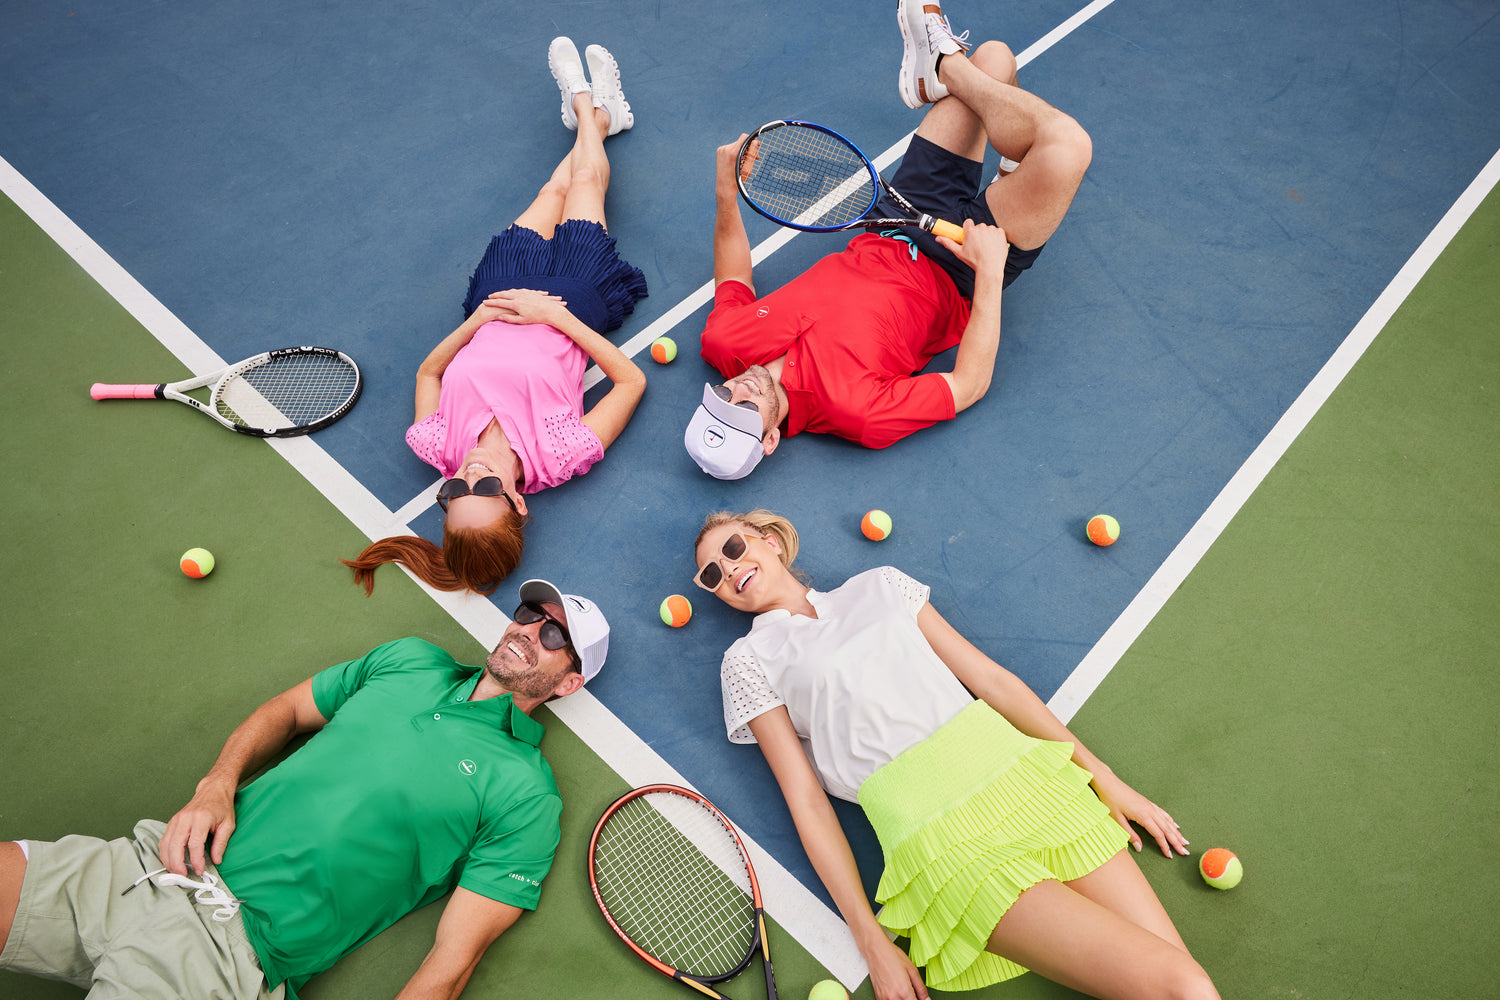 Four chic Tennis Players on the court dressed in Catch + Club sportswear.